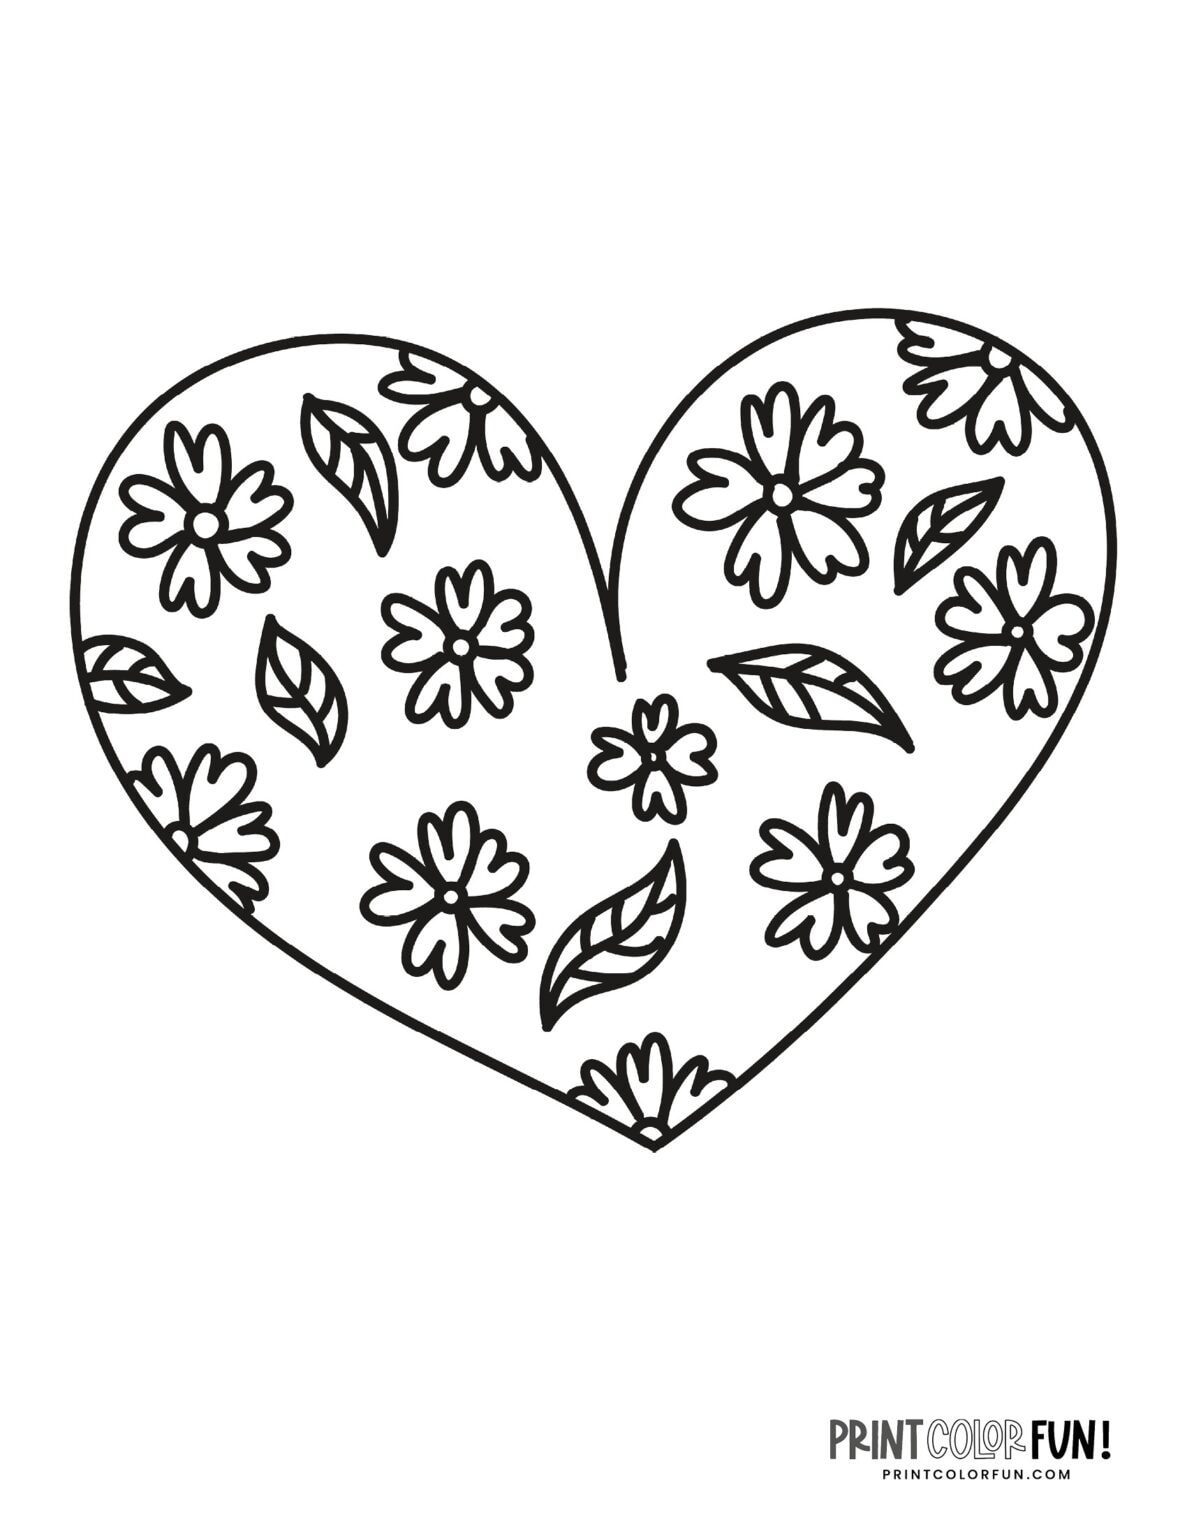 100+ Printable Heart Coloring Pages: A Huge Collection Of Hearts For